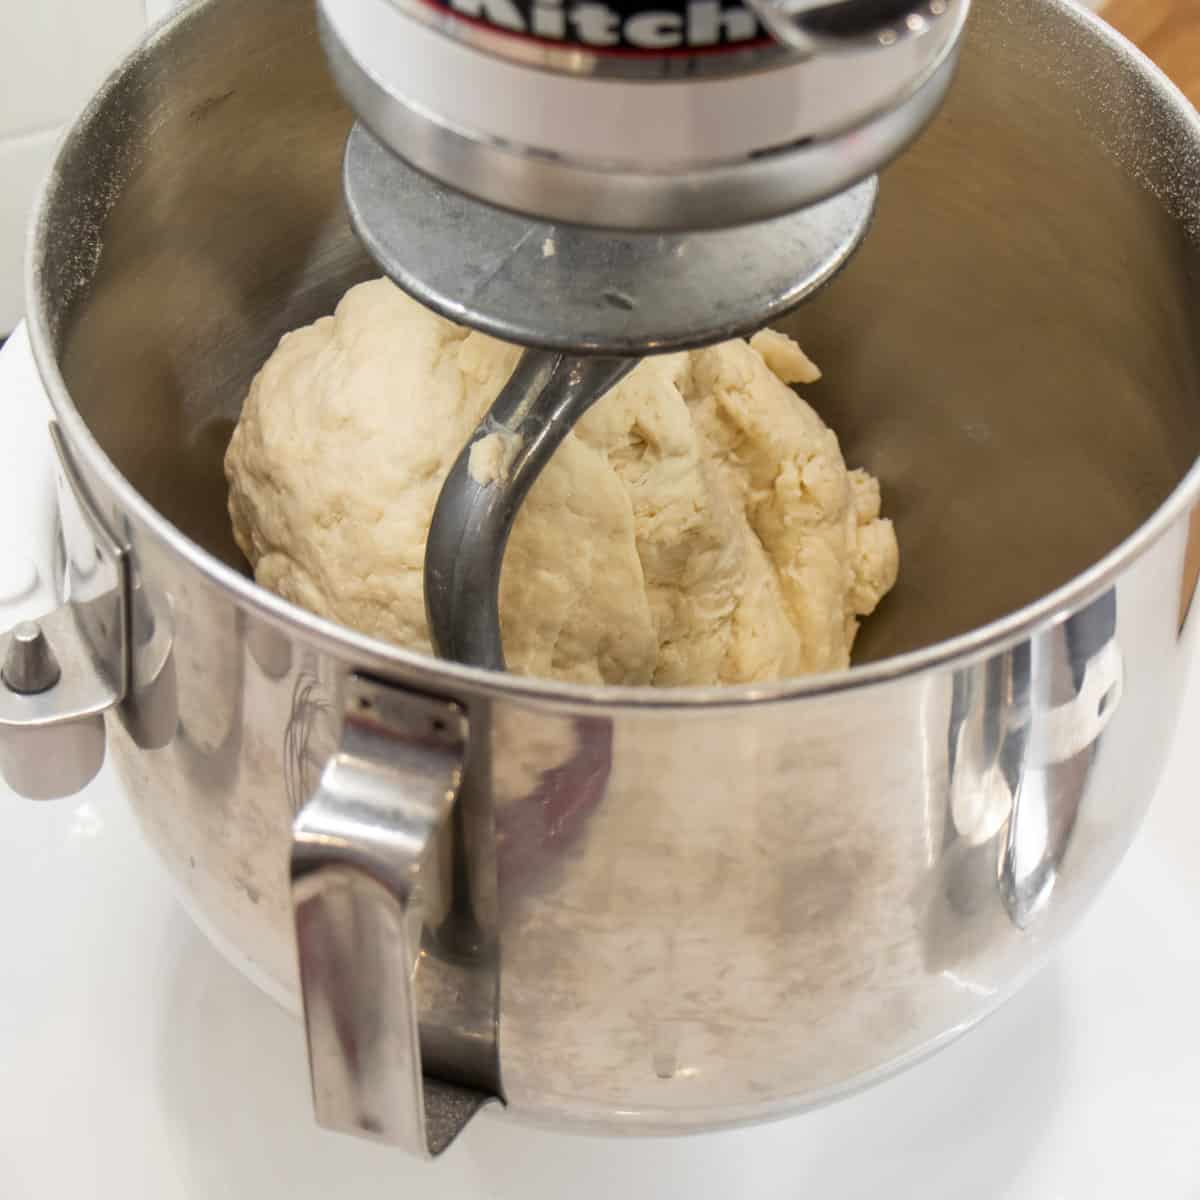 Kneading bread dough in a stand mixer.